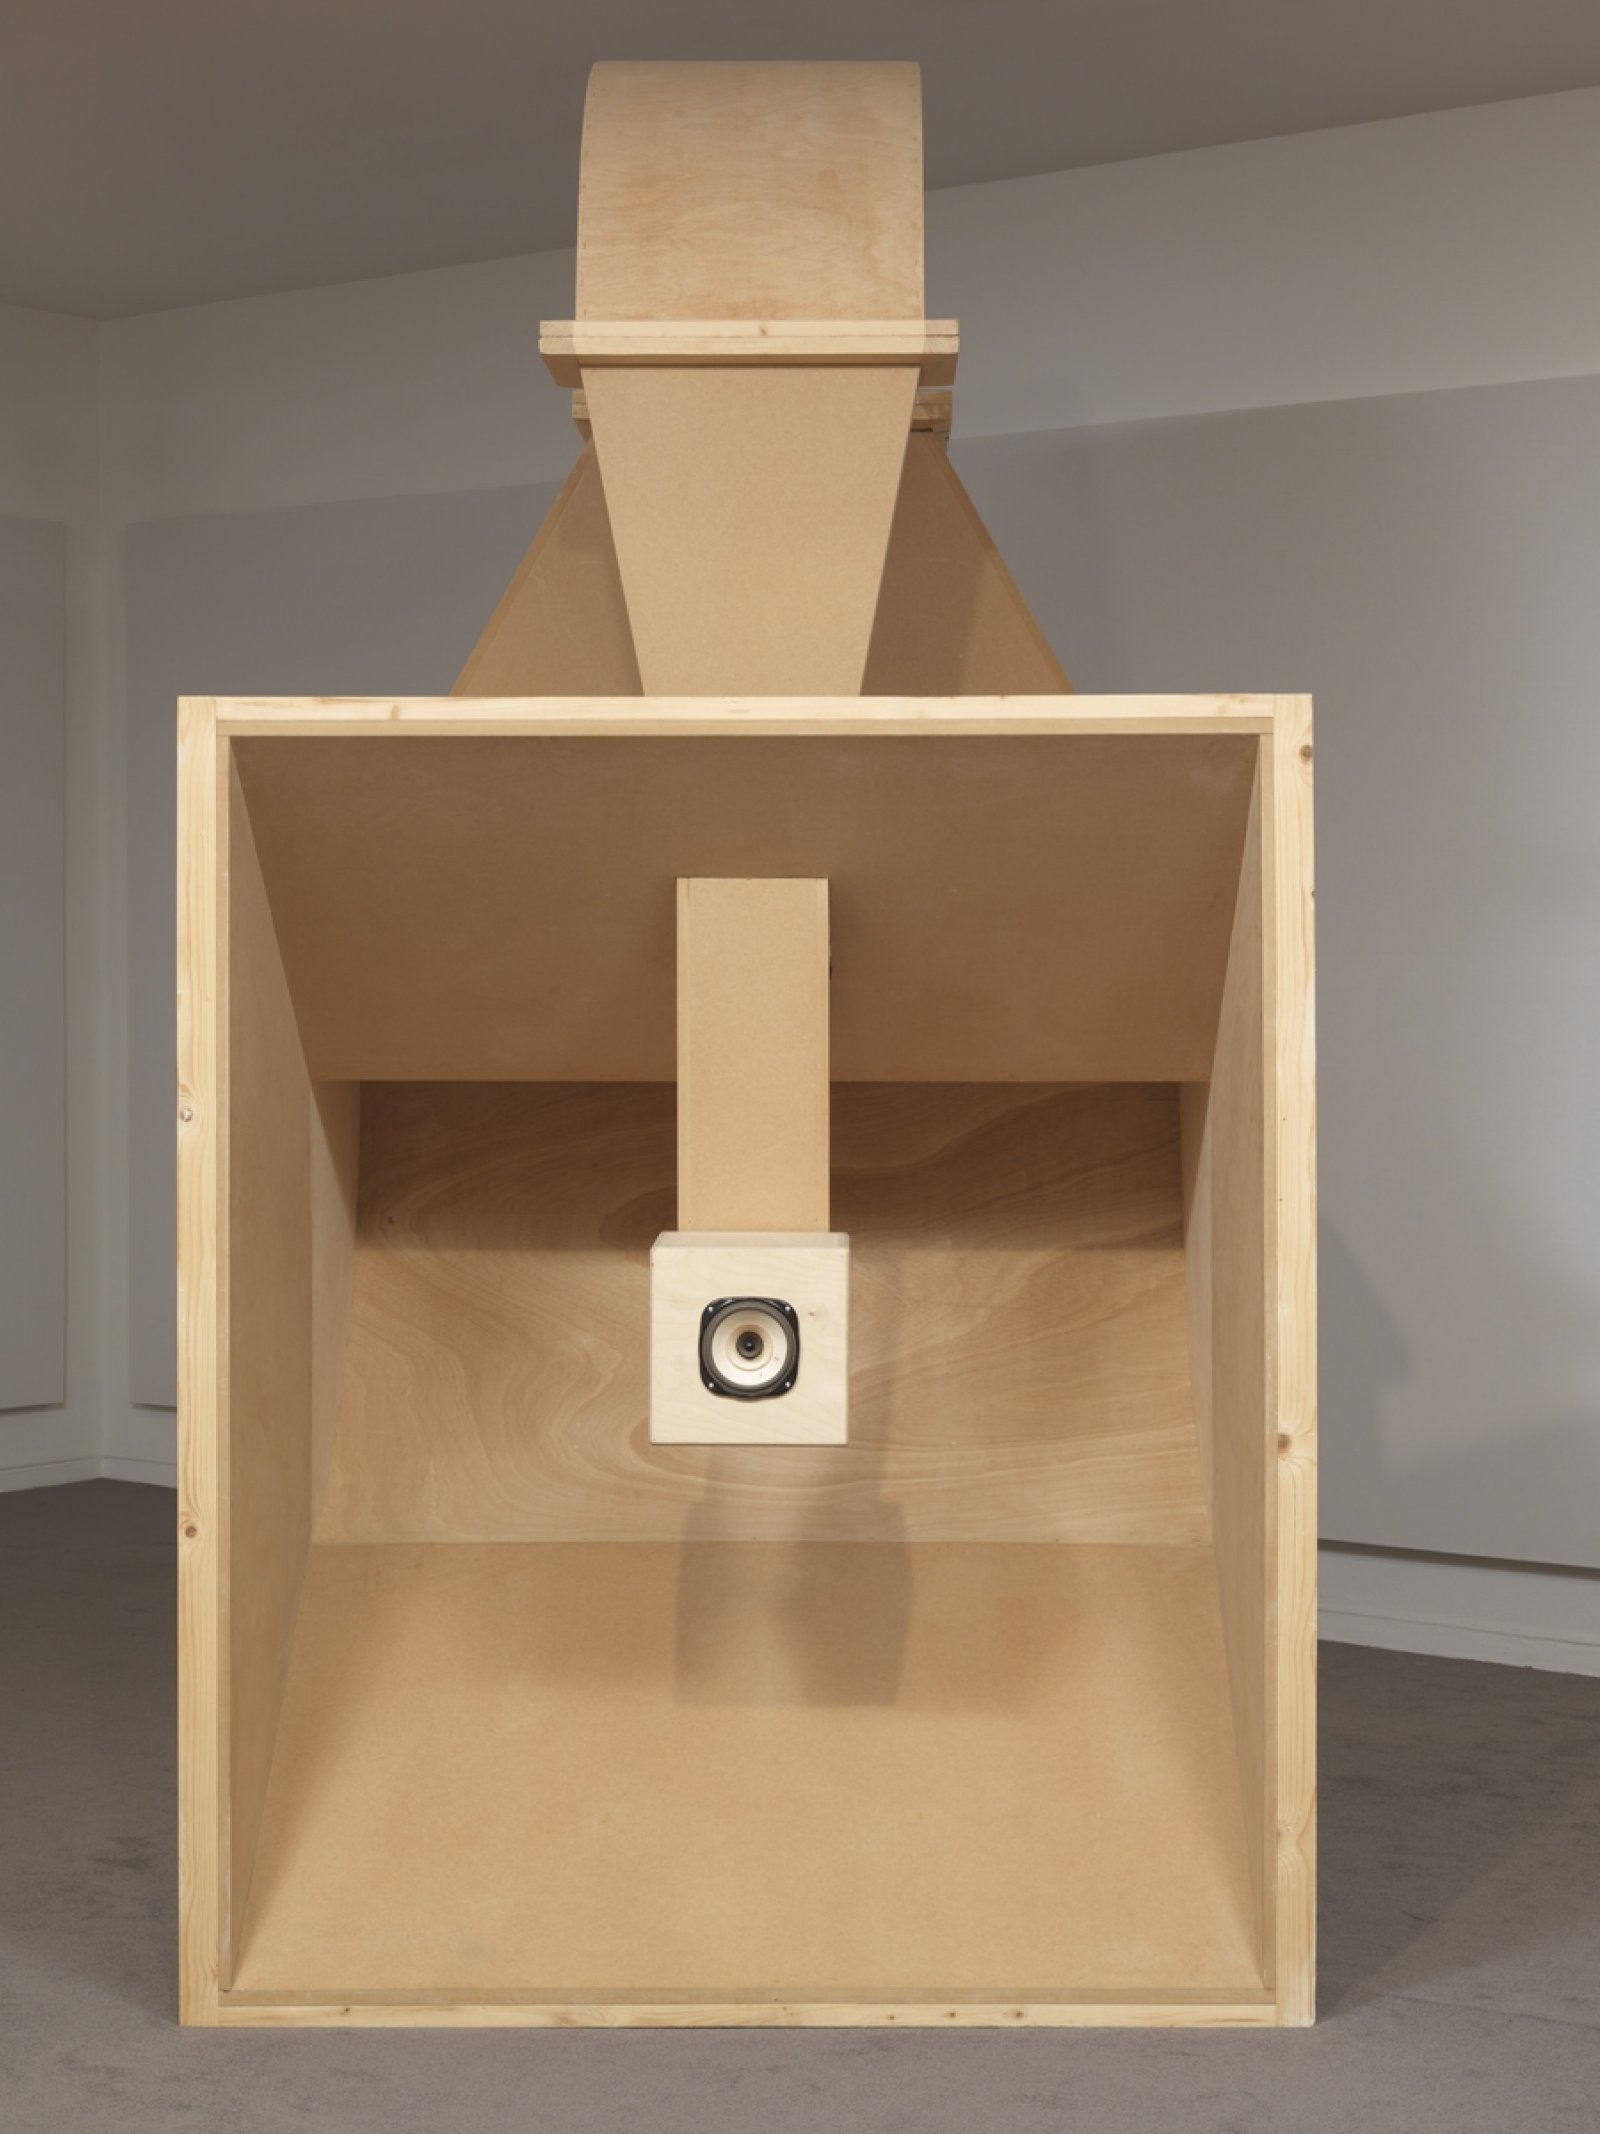 Kevin Schmidt, DIY HIFI, 2014, wood, lowther dx55 speakers, diy kit tube amplifier, record player, cables, hardware, canvas, reel-to-reel tape recorder, field recording of future site c dam site, each speaker 117 x 55 x 61 in. (297 x 139 x 154 cm). Installation view, We Are the Robots, Vancouver Art Gallery, Vancouver, 2018